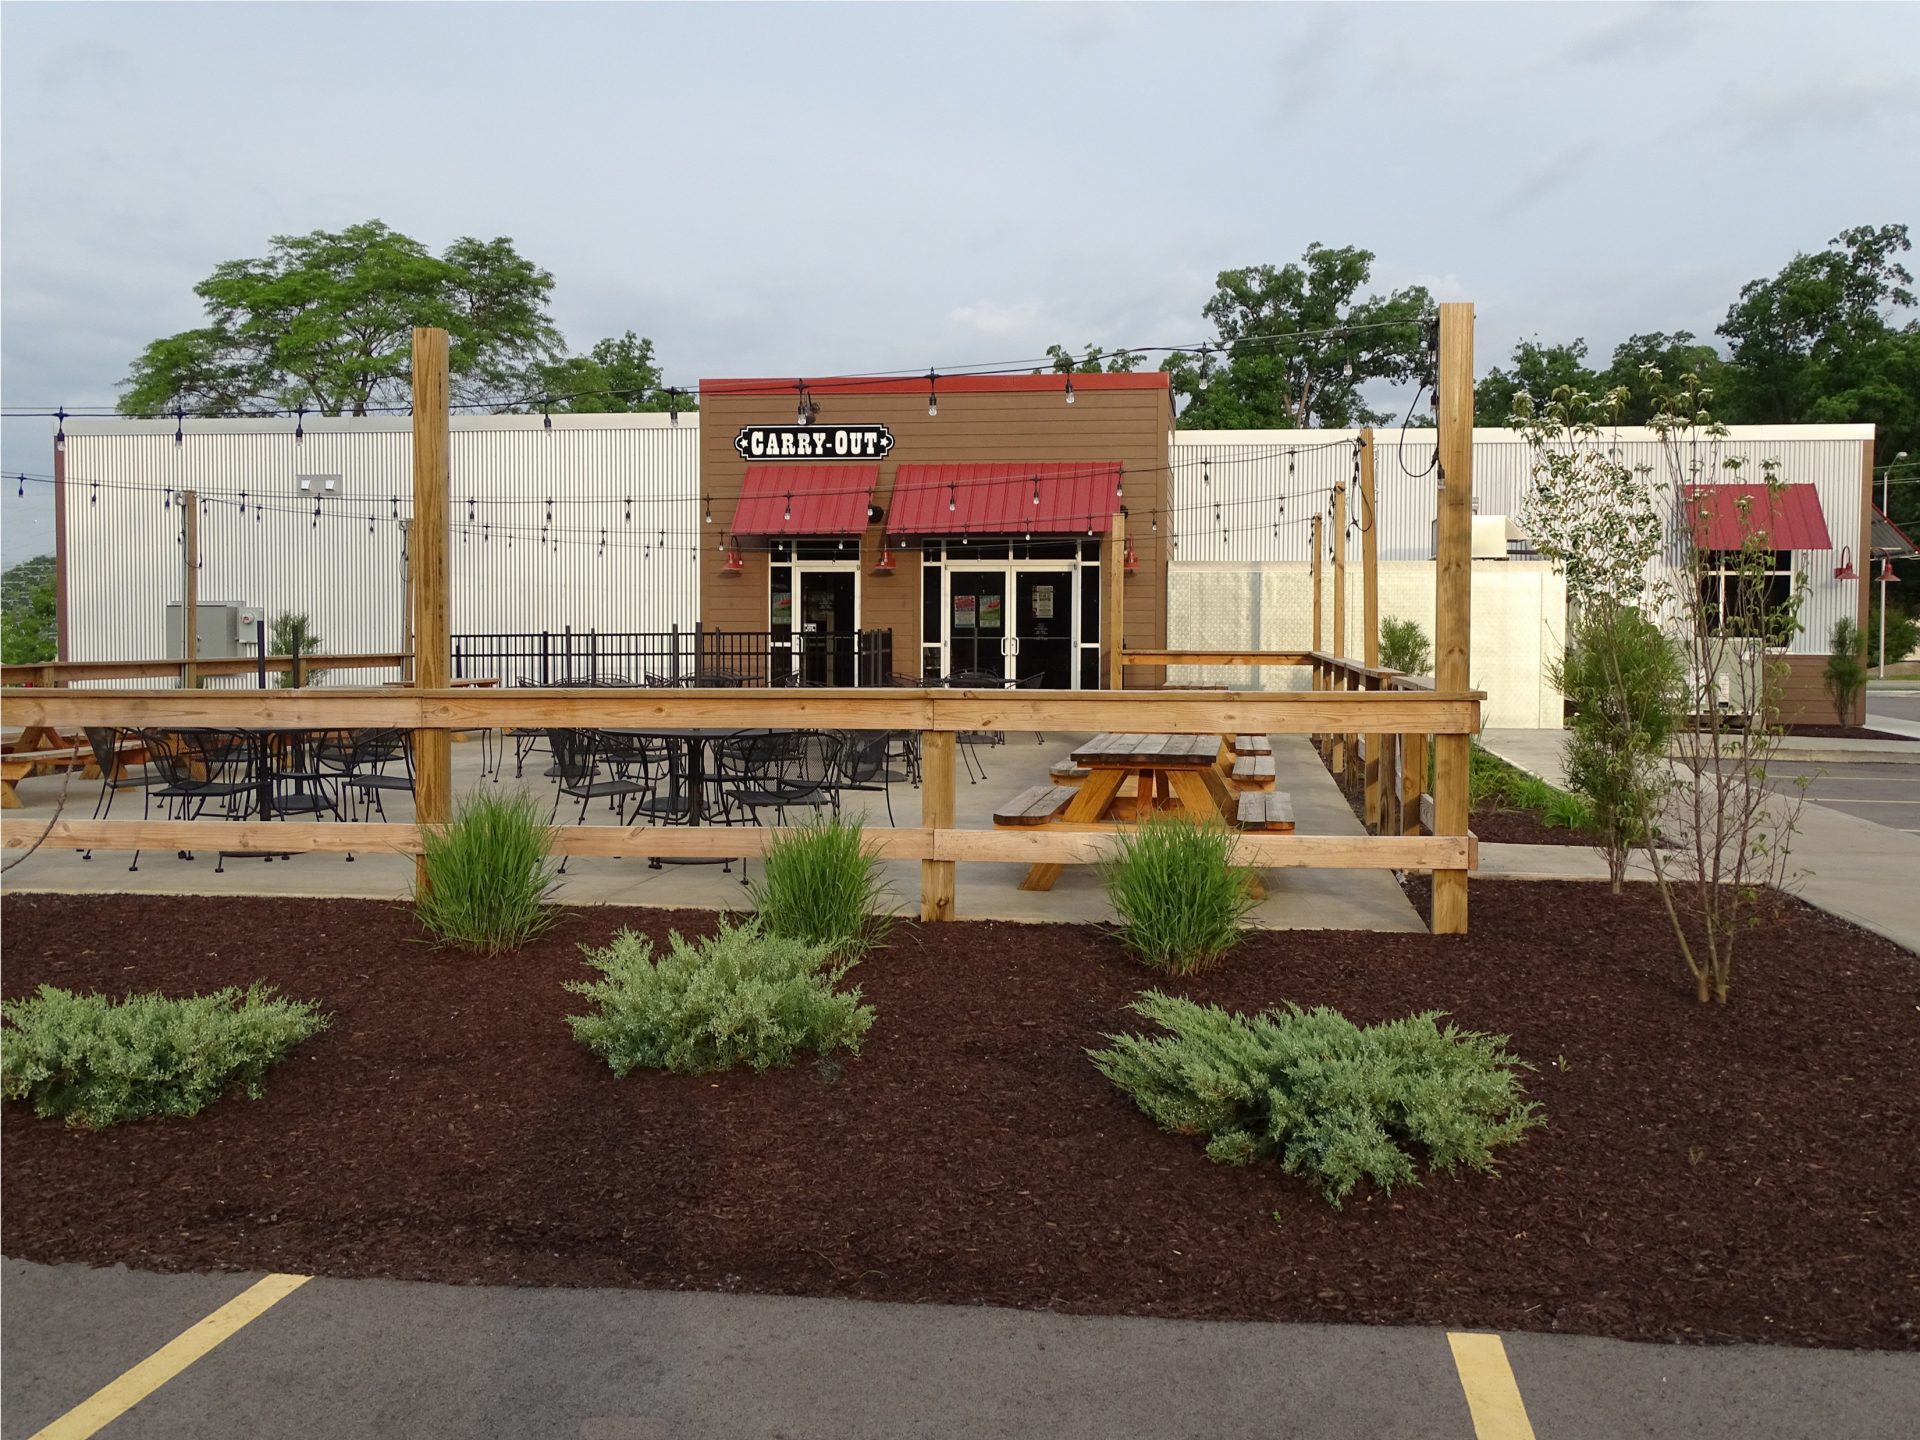 Carry out area of new restaurant in Ft. Wayne